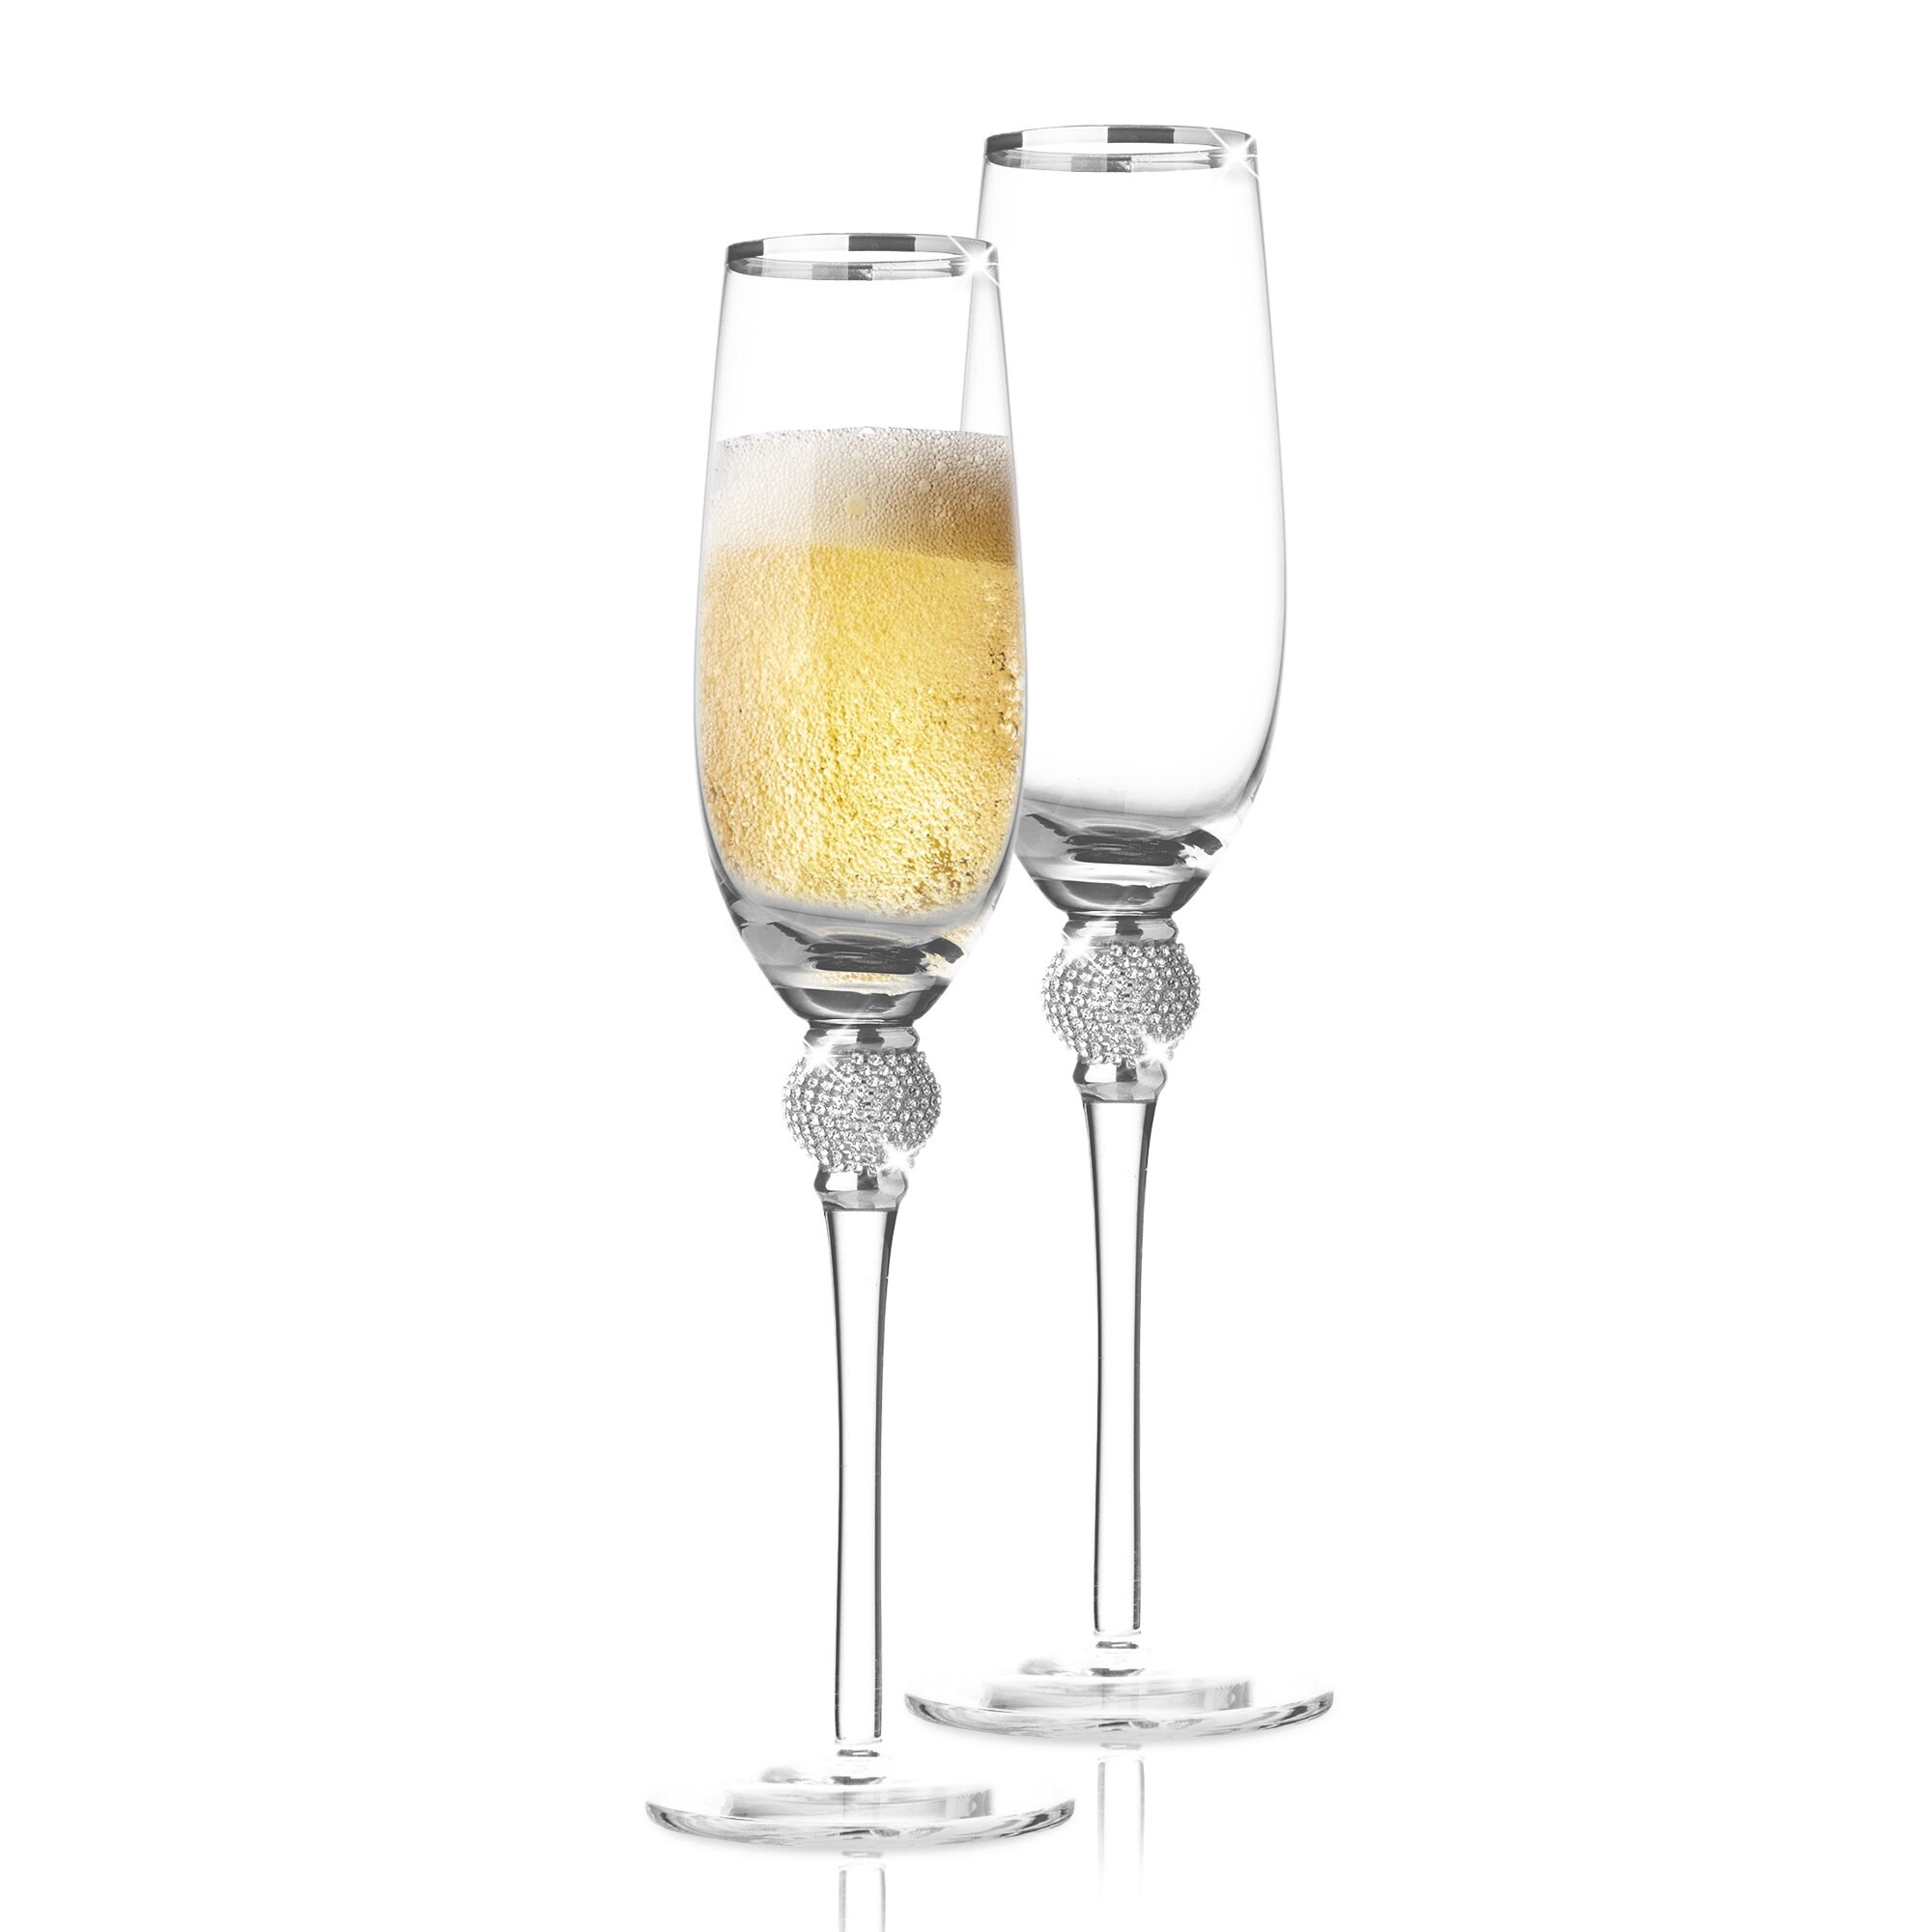 https://ak1.ostkcdn.com/images/products/is/images/direct/0c6c0f0c446dba52c514437687d8a611834f197e/Berkware-Crystal-Champagne-Glass-with-Gold-or-Silver-Rim.jpg